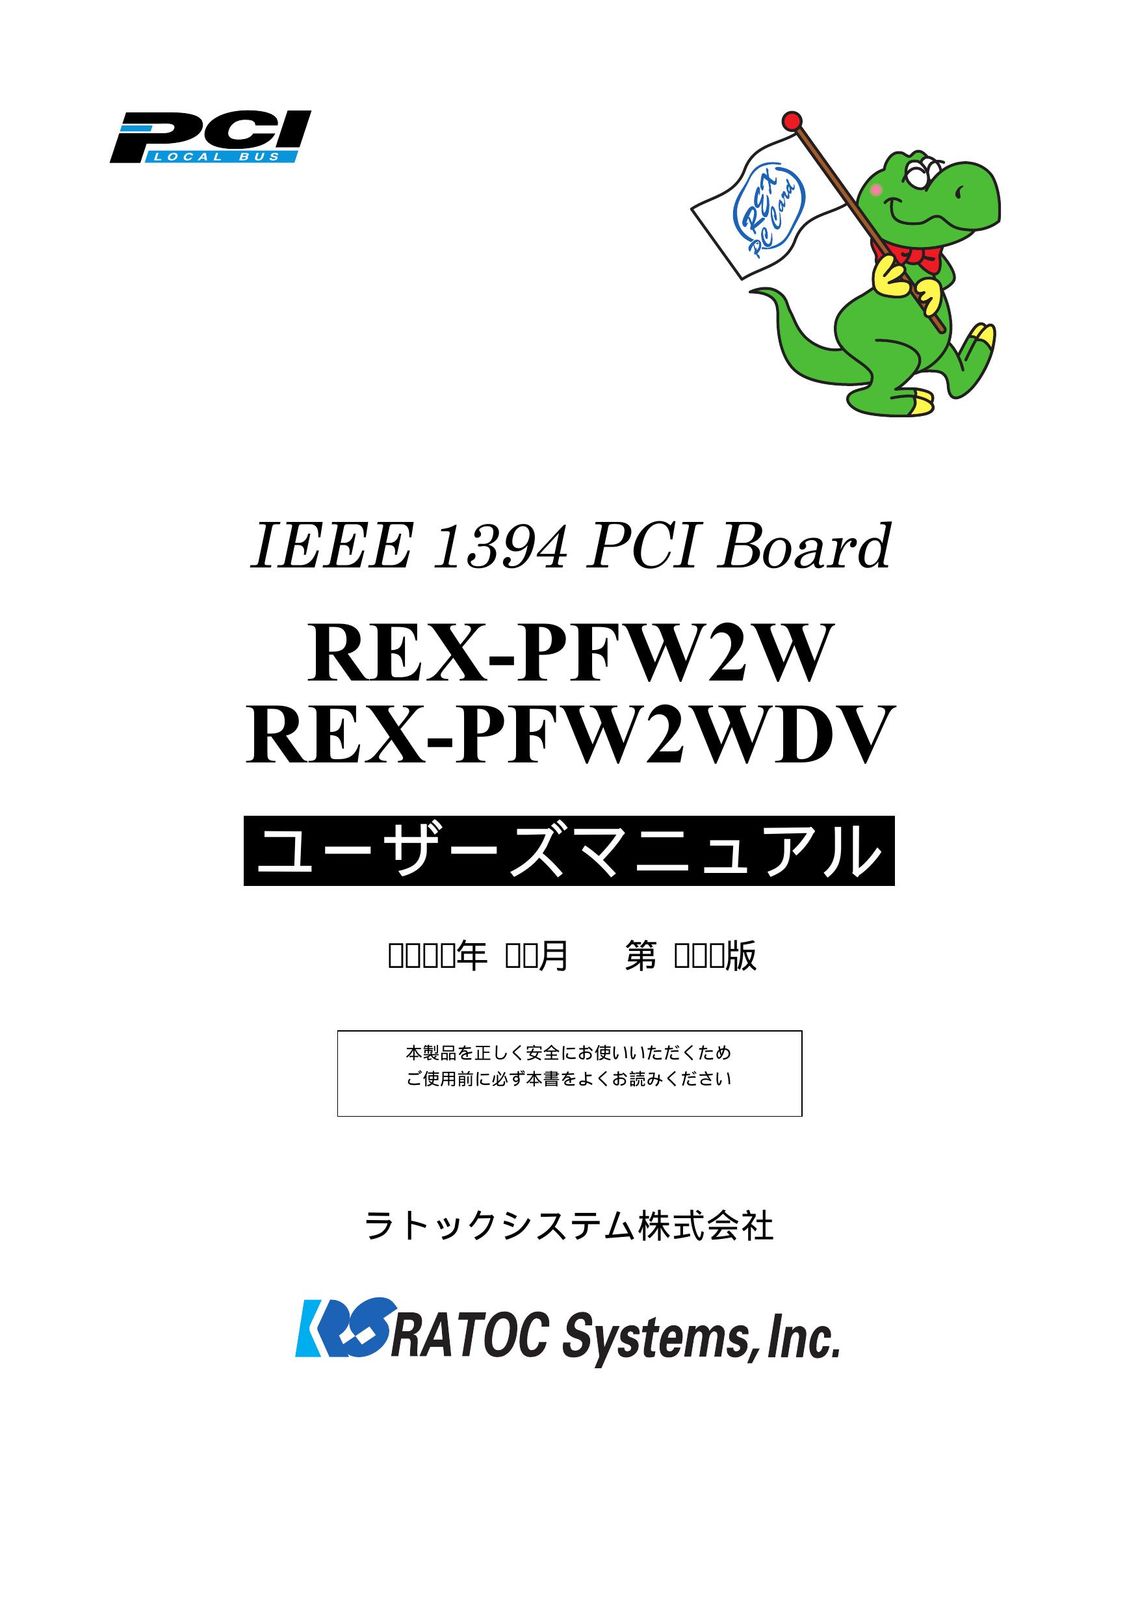 Ratoc Systems REX-PFW2WDV Network Card User Manual